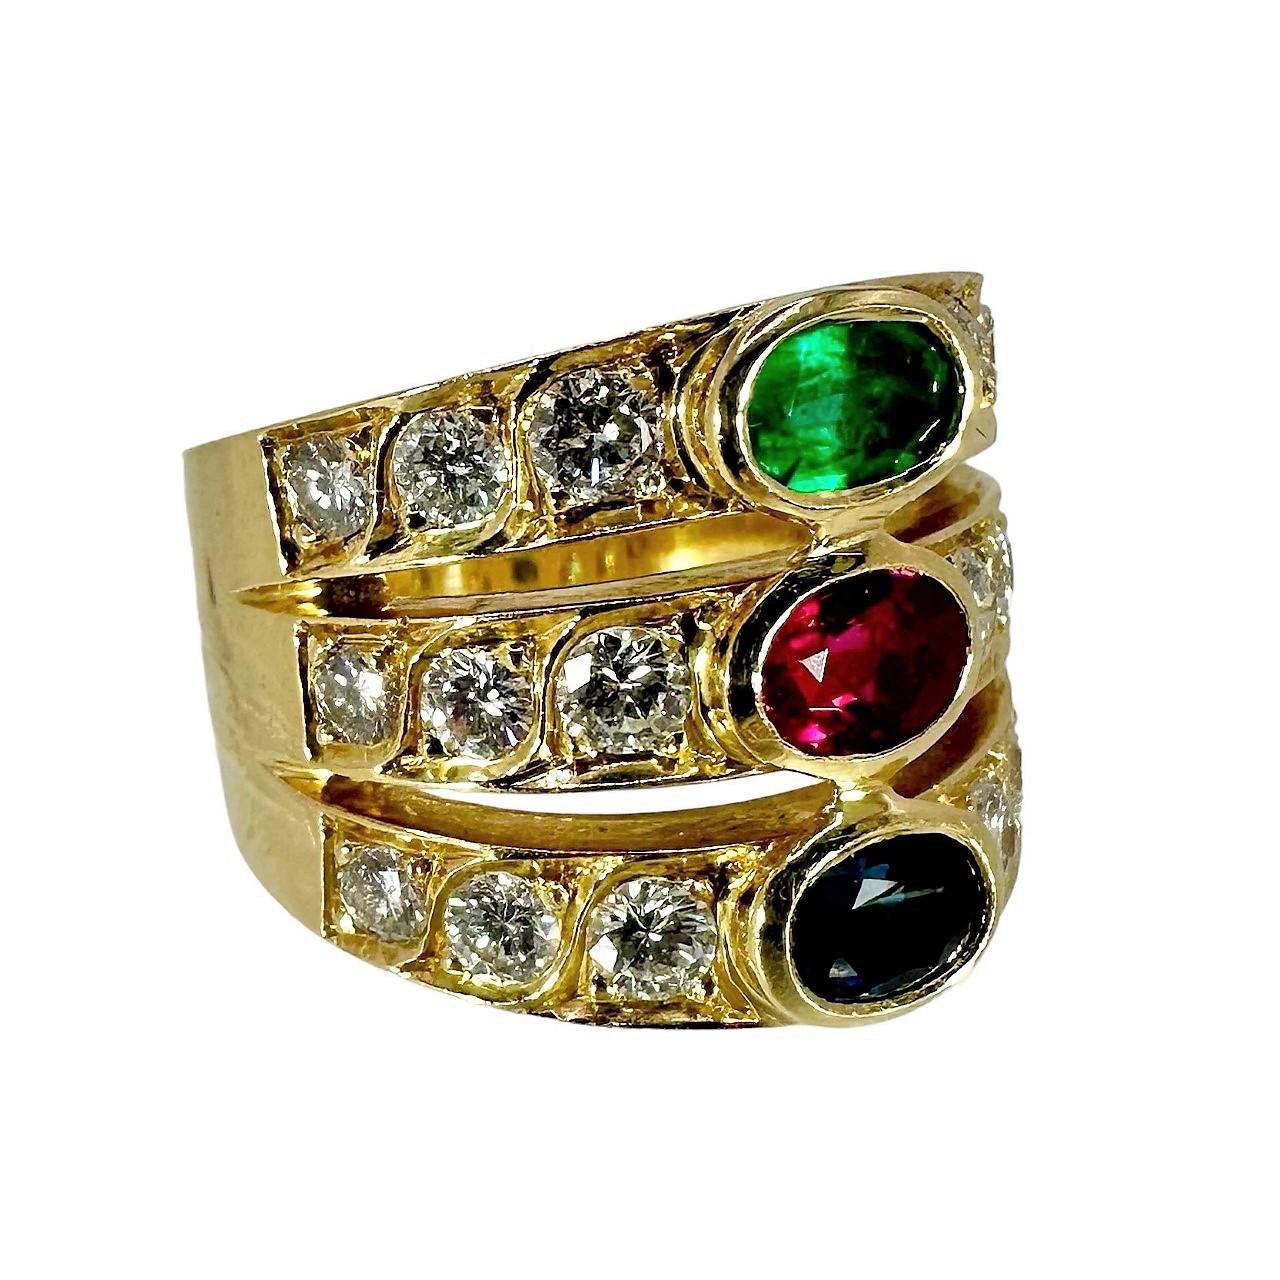 An 18K yellow gold ring with a design area measuring 3/4 of an inch, and set with an oval cut emerald, ruby, and sapphire. To the left and right of each beautiful colored gem are 3 pave set diamonds. The 18 diamonds weigh approximately 2.5ct total